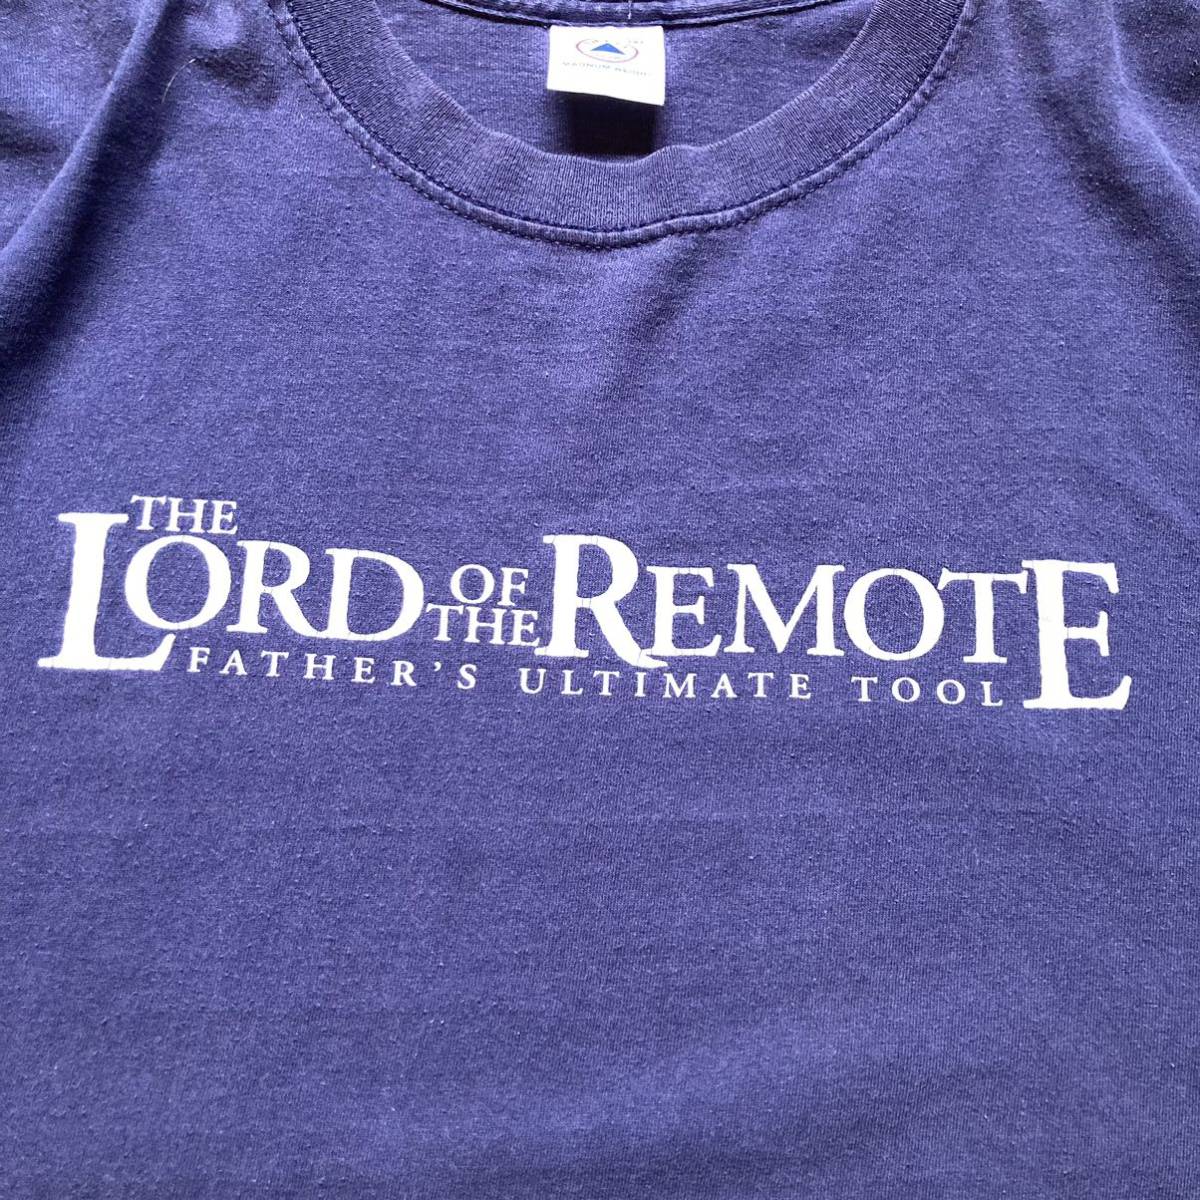 00s the lord of the rings parody T-shirt 「the lord of the “remote”」ロードオブザリング　パロディTシャツ　半袖Tシャツ